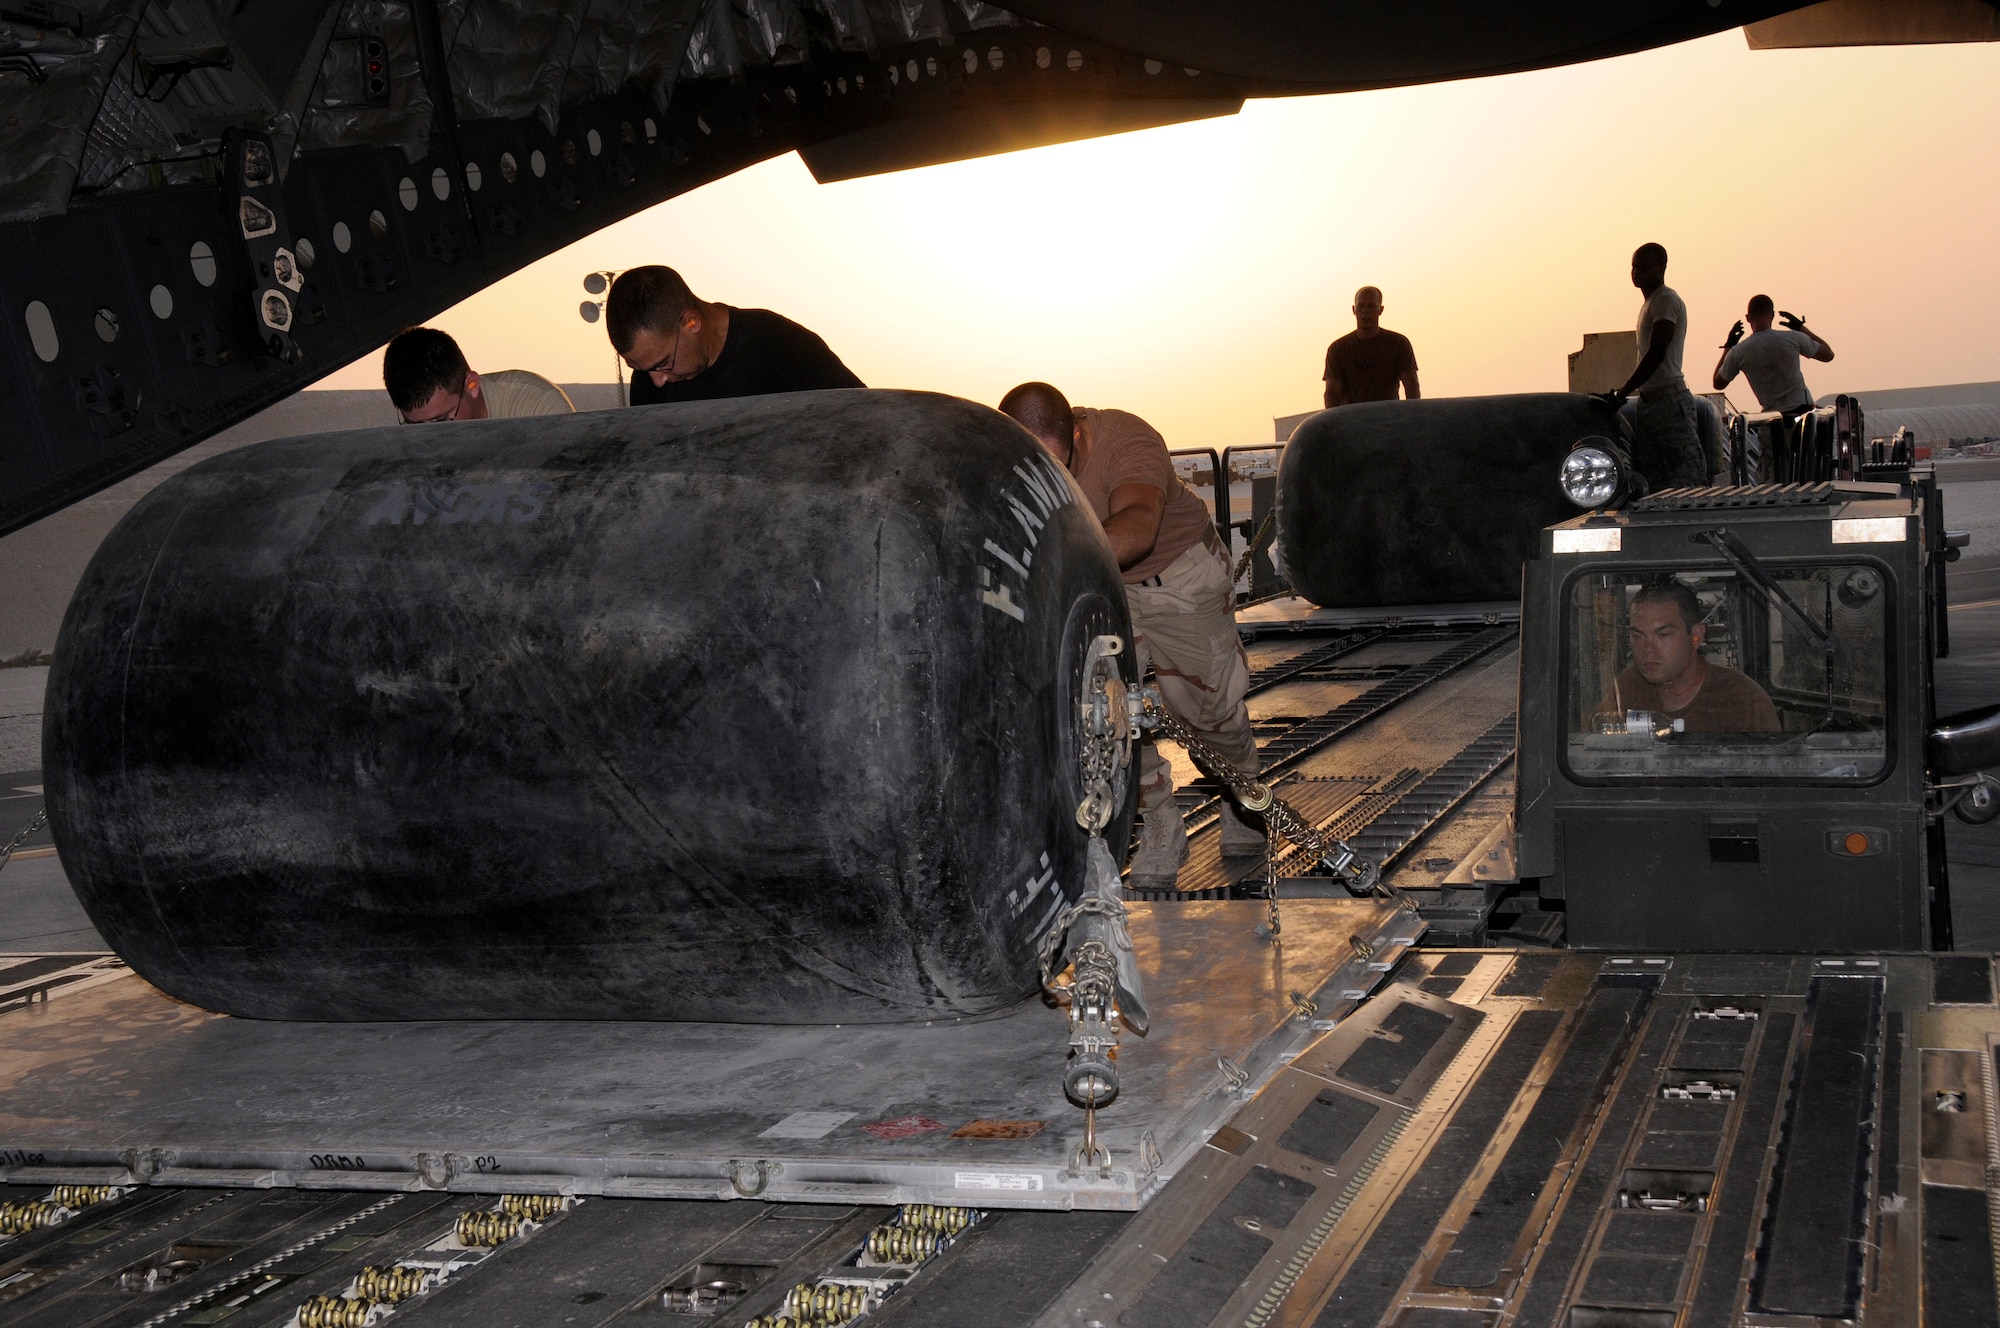 Senior Airman Matthew Brandt, 8th Expeditionary Air Mobility Squadron, manipulates a 60K loader to assist in off-loading pallets onto a C-17 Globemaster III aircraft at an undisclosed air base Aug. 8, 2008.  The equipment and supplies loaded are destined for bases up range in support of Operations Iraqi and Enduring Freedom. Airman Brandt is deployed from Royal Air Force Mildenhall, United Kingdom. (U.S. Air Force photo by Tech. Sgt. Michael Boquette/Released)